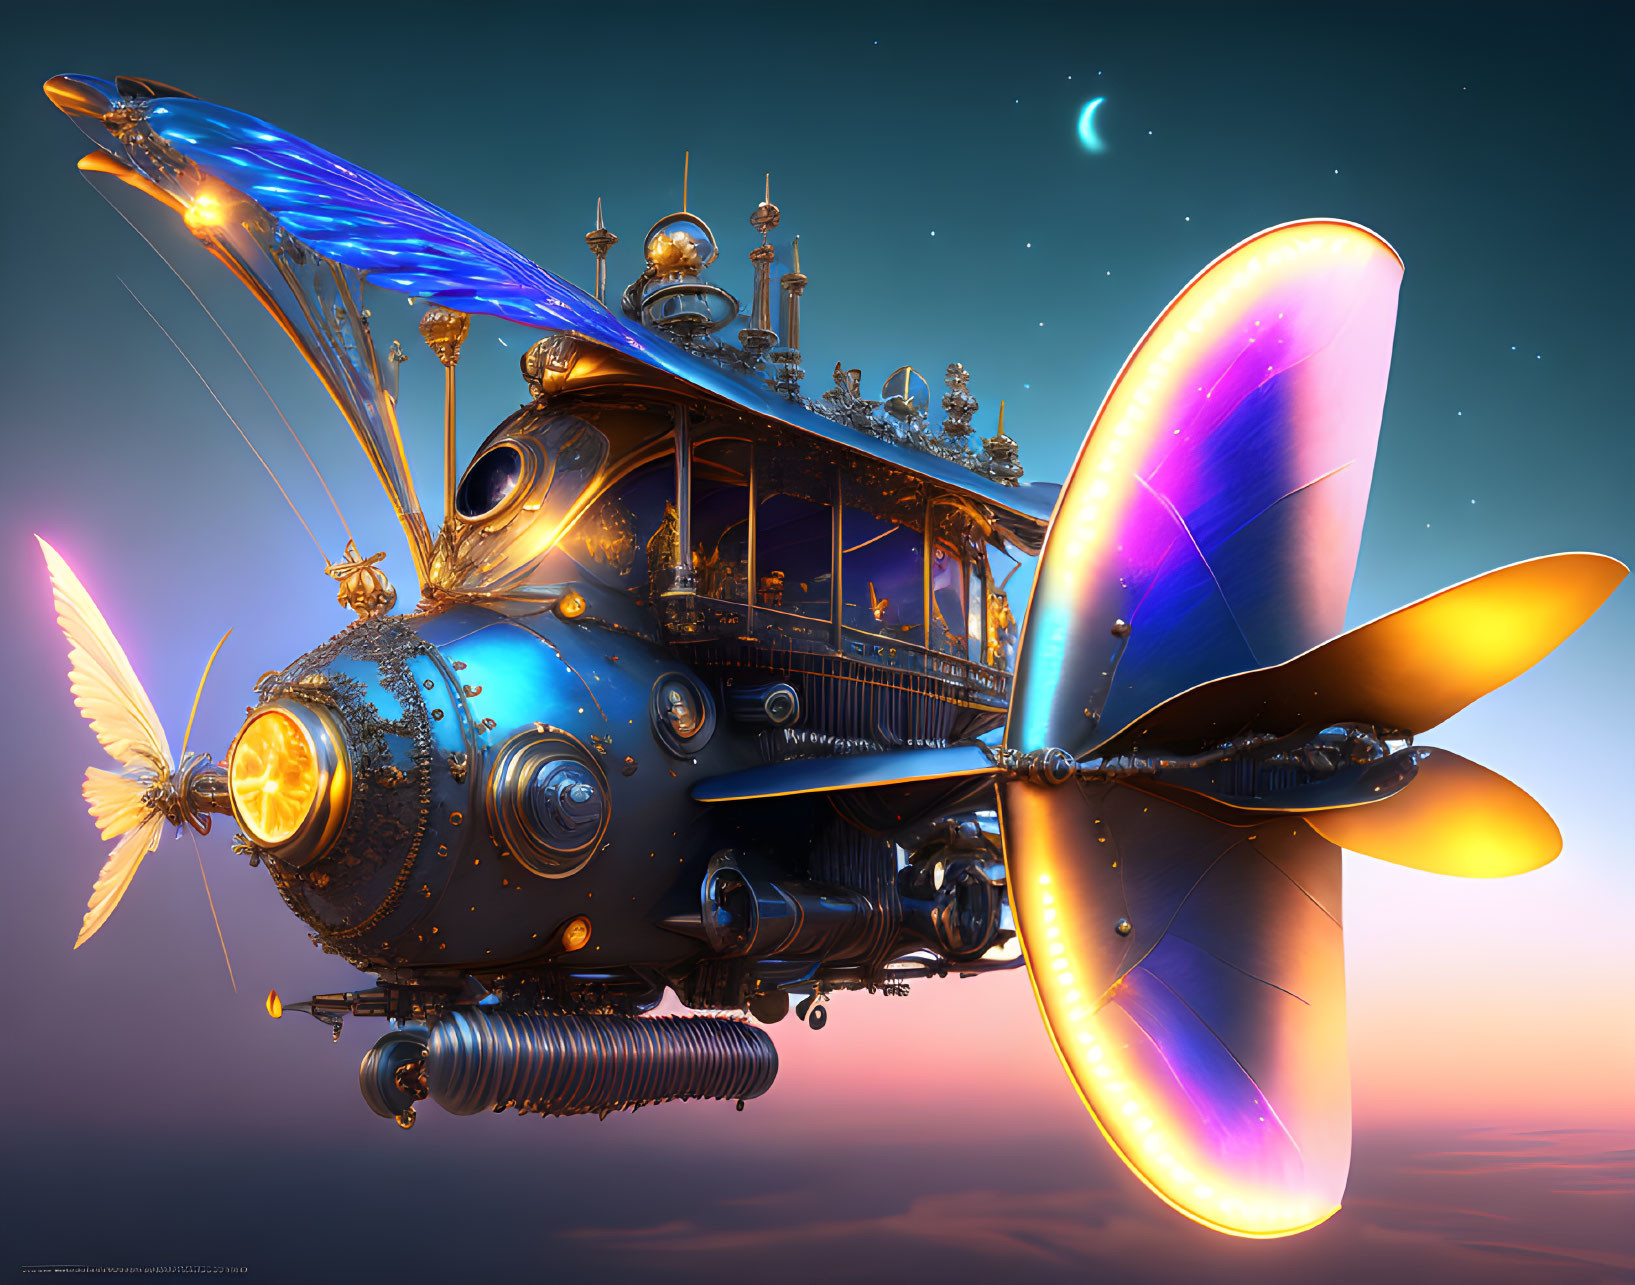 Steampunk-style airship with butterfly wings in serene twilight sky